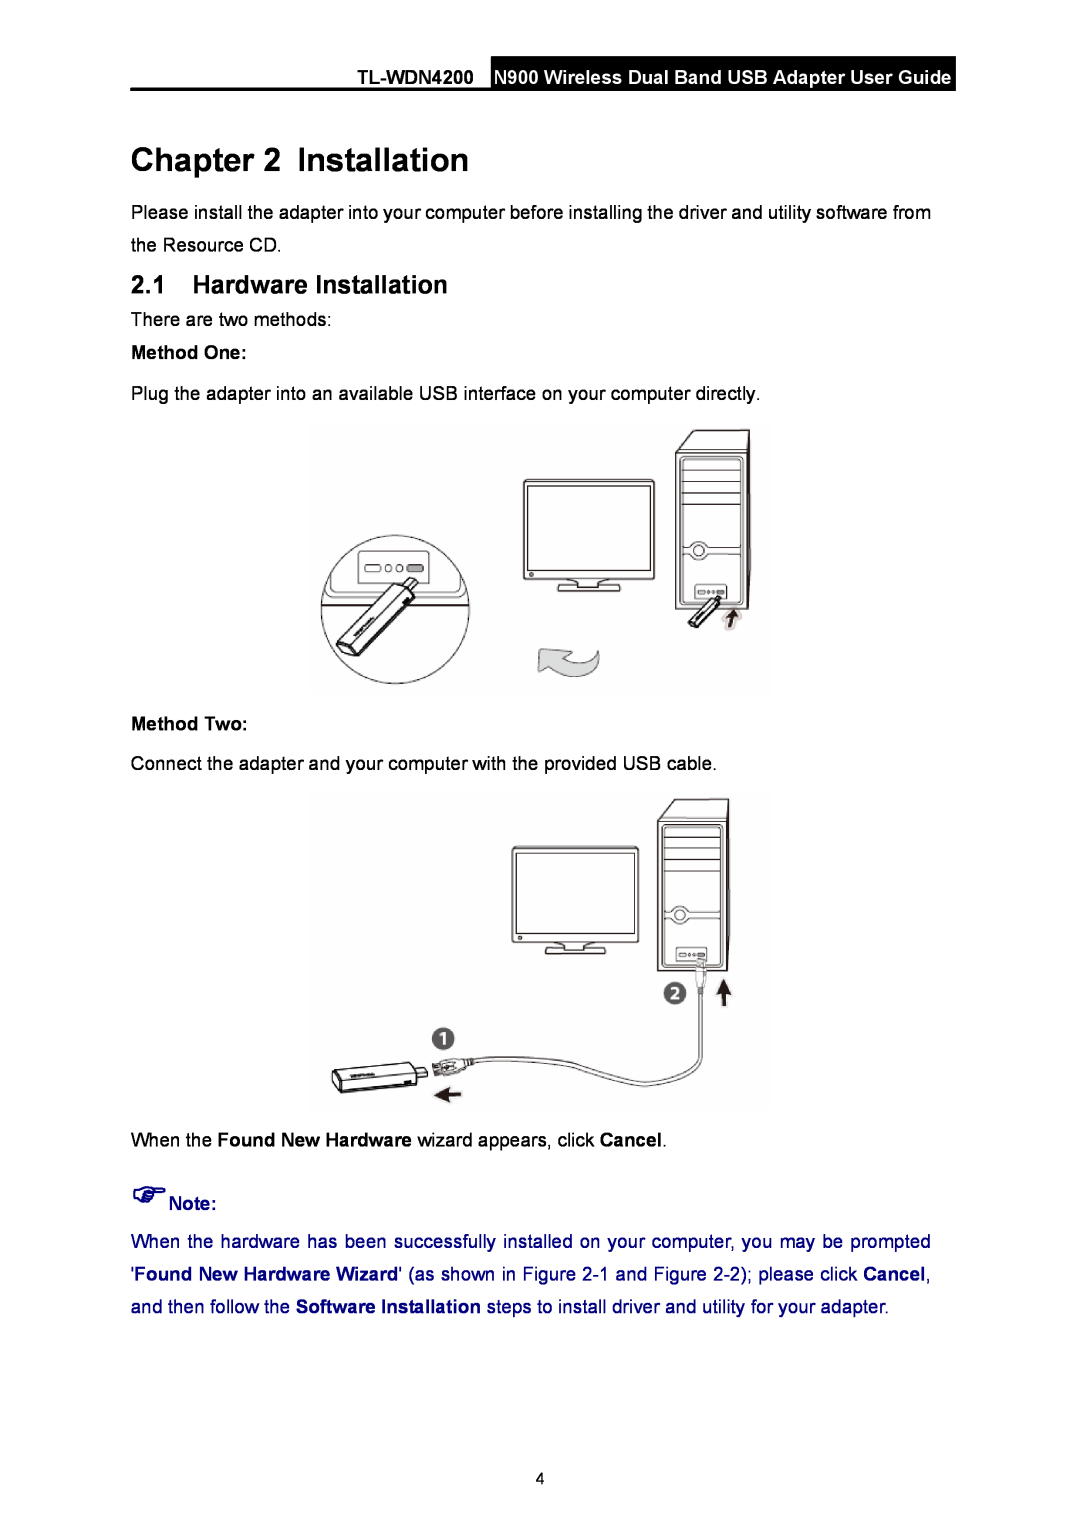 TP-Link Hardware Installation, TL-WDN4200 N900 Wireless Dual Band USB Adapter User Guide, Method One, Method Two 